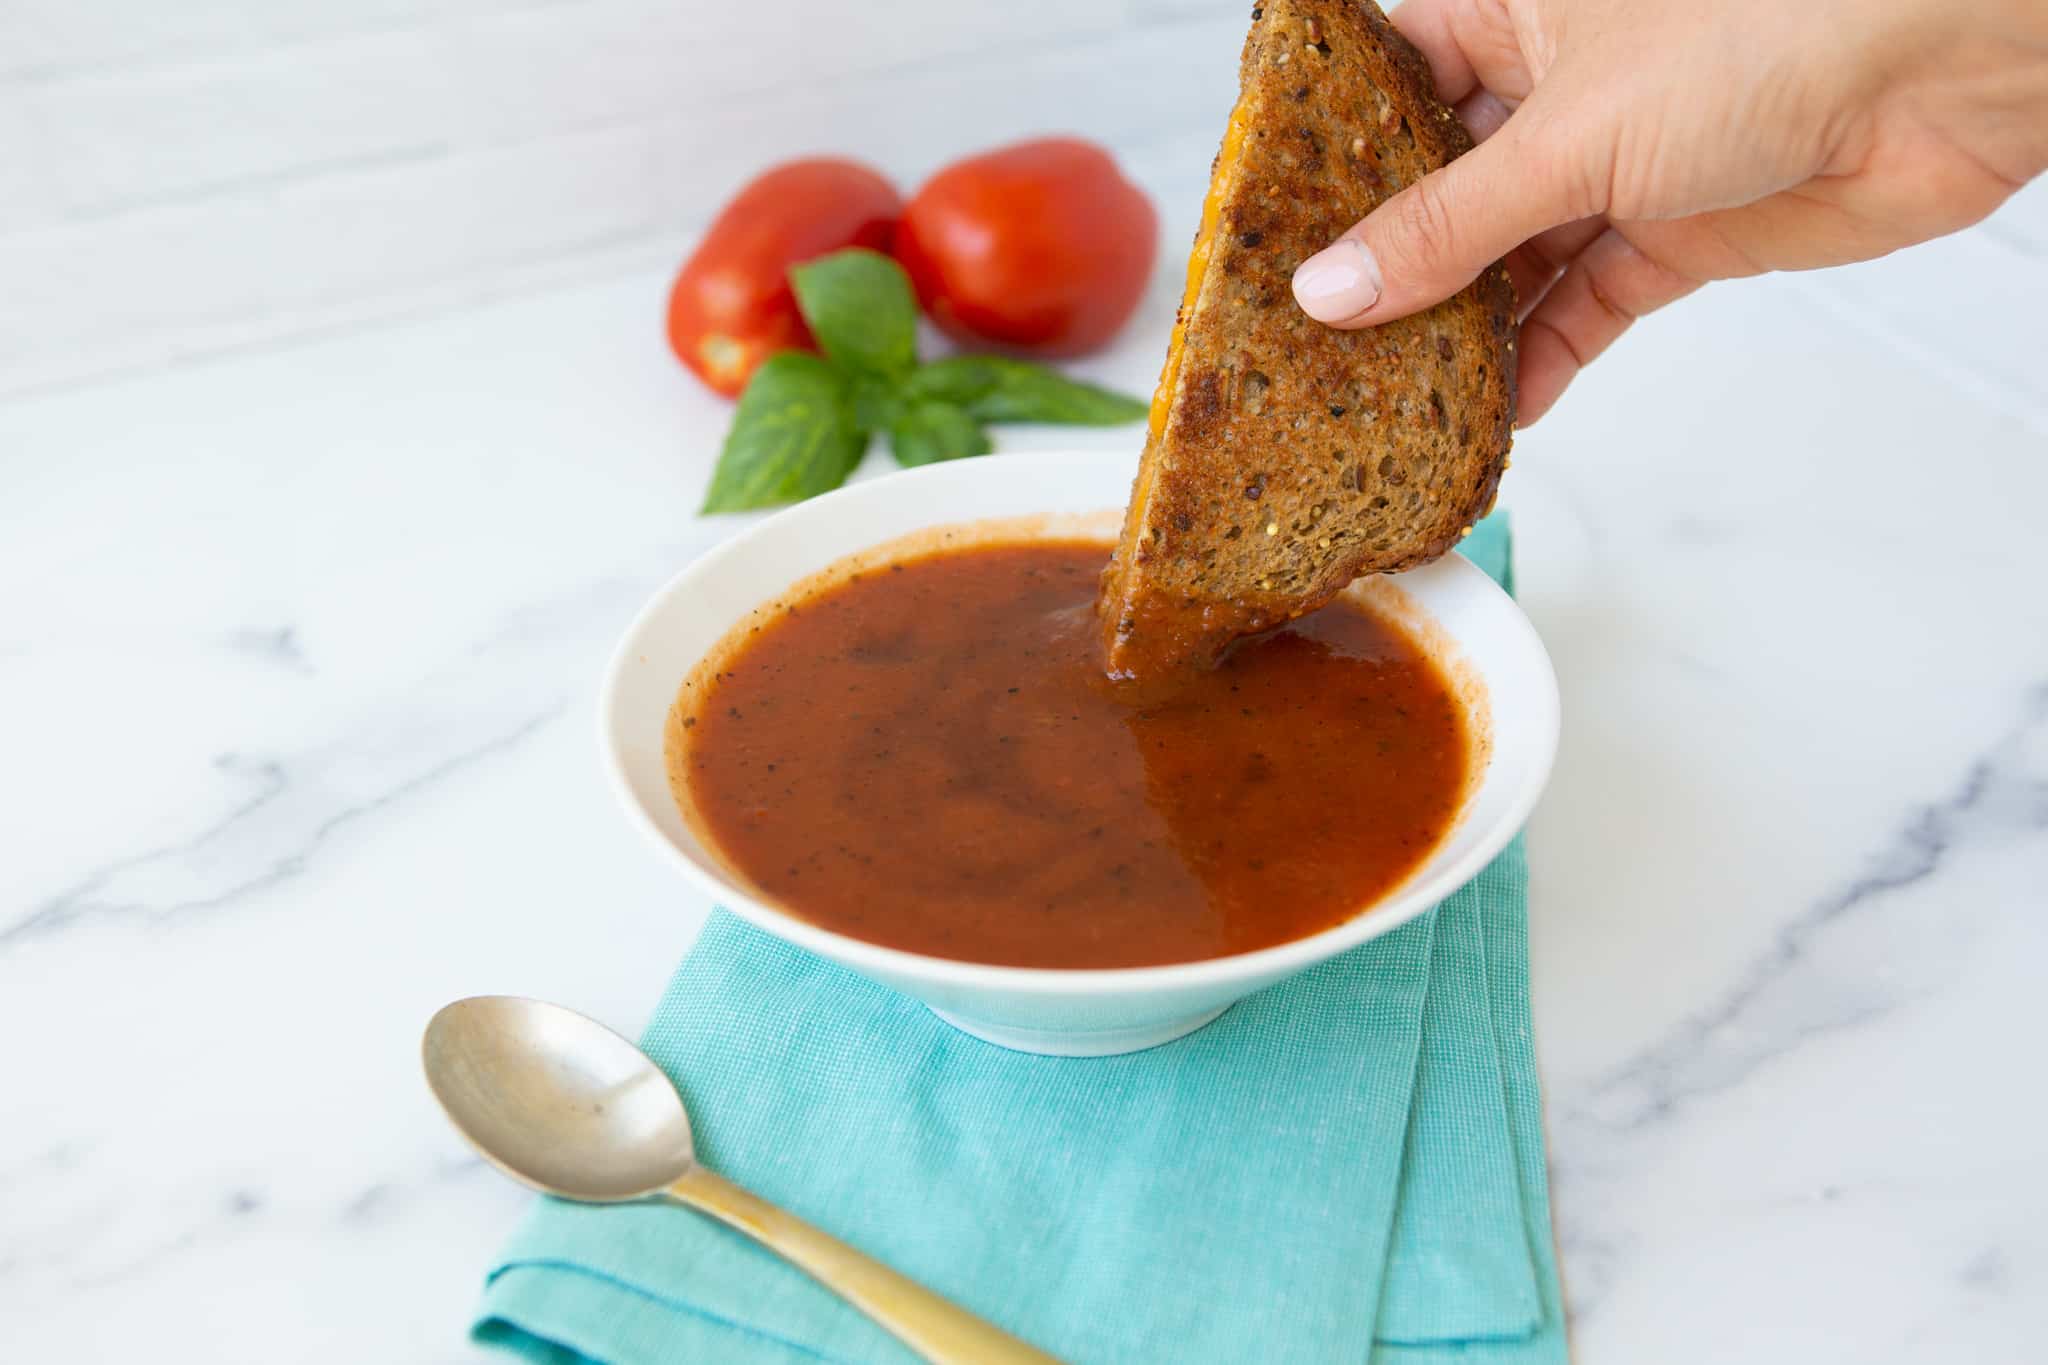 Dipping grilled cheese into a bowl of tomato soup